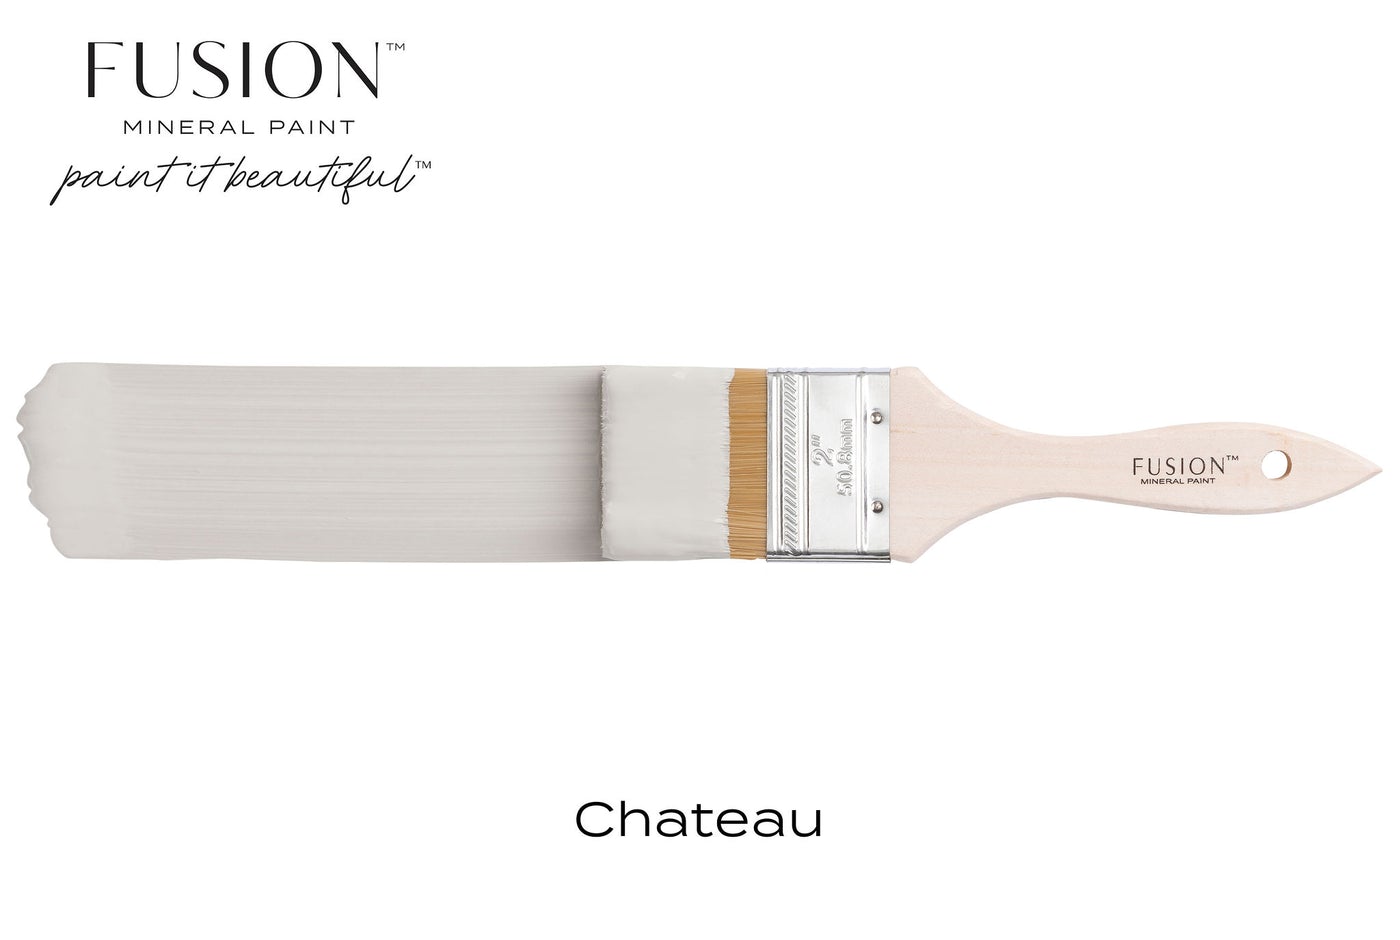 CHATEAU - FUSION MINERAL PAINT